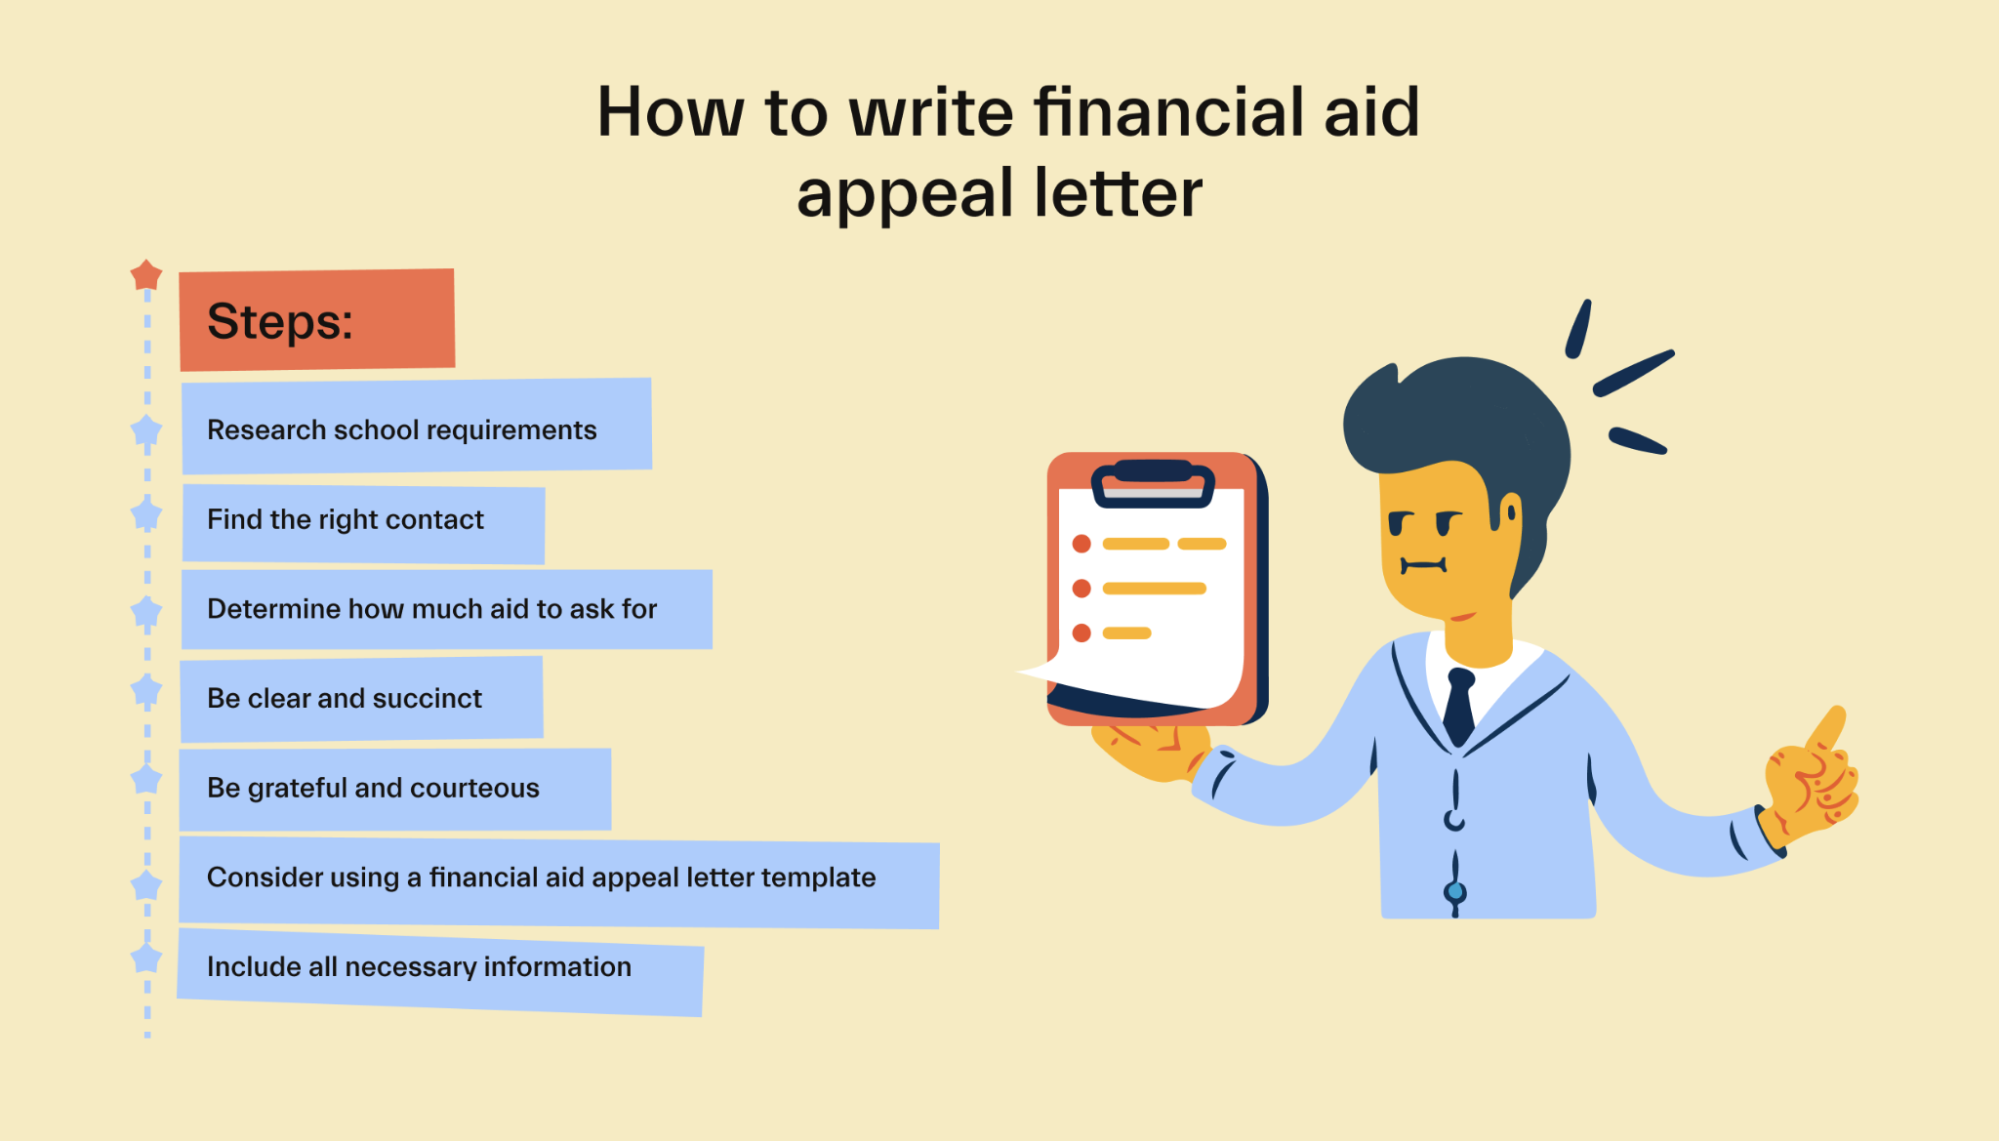 How to write financial aid appeal letter